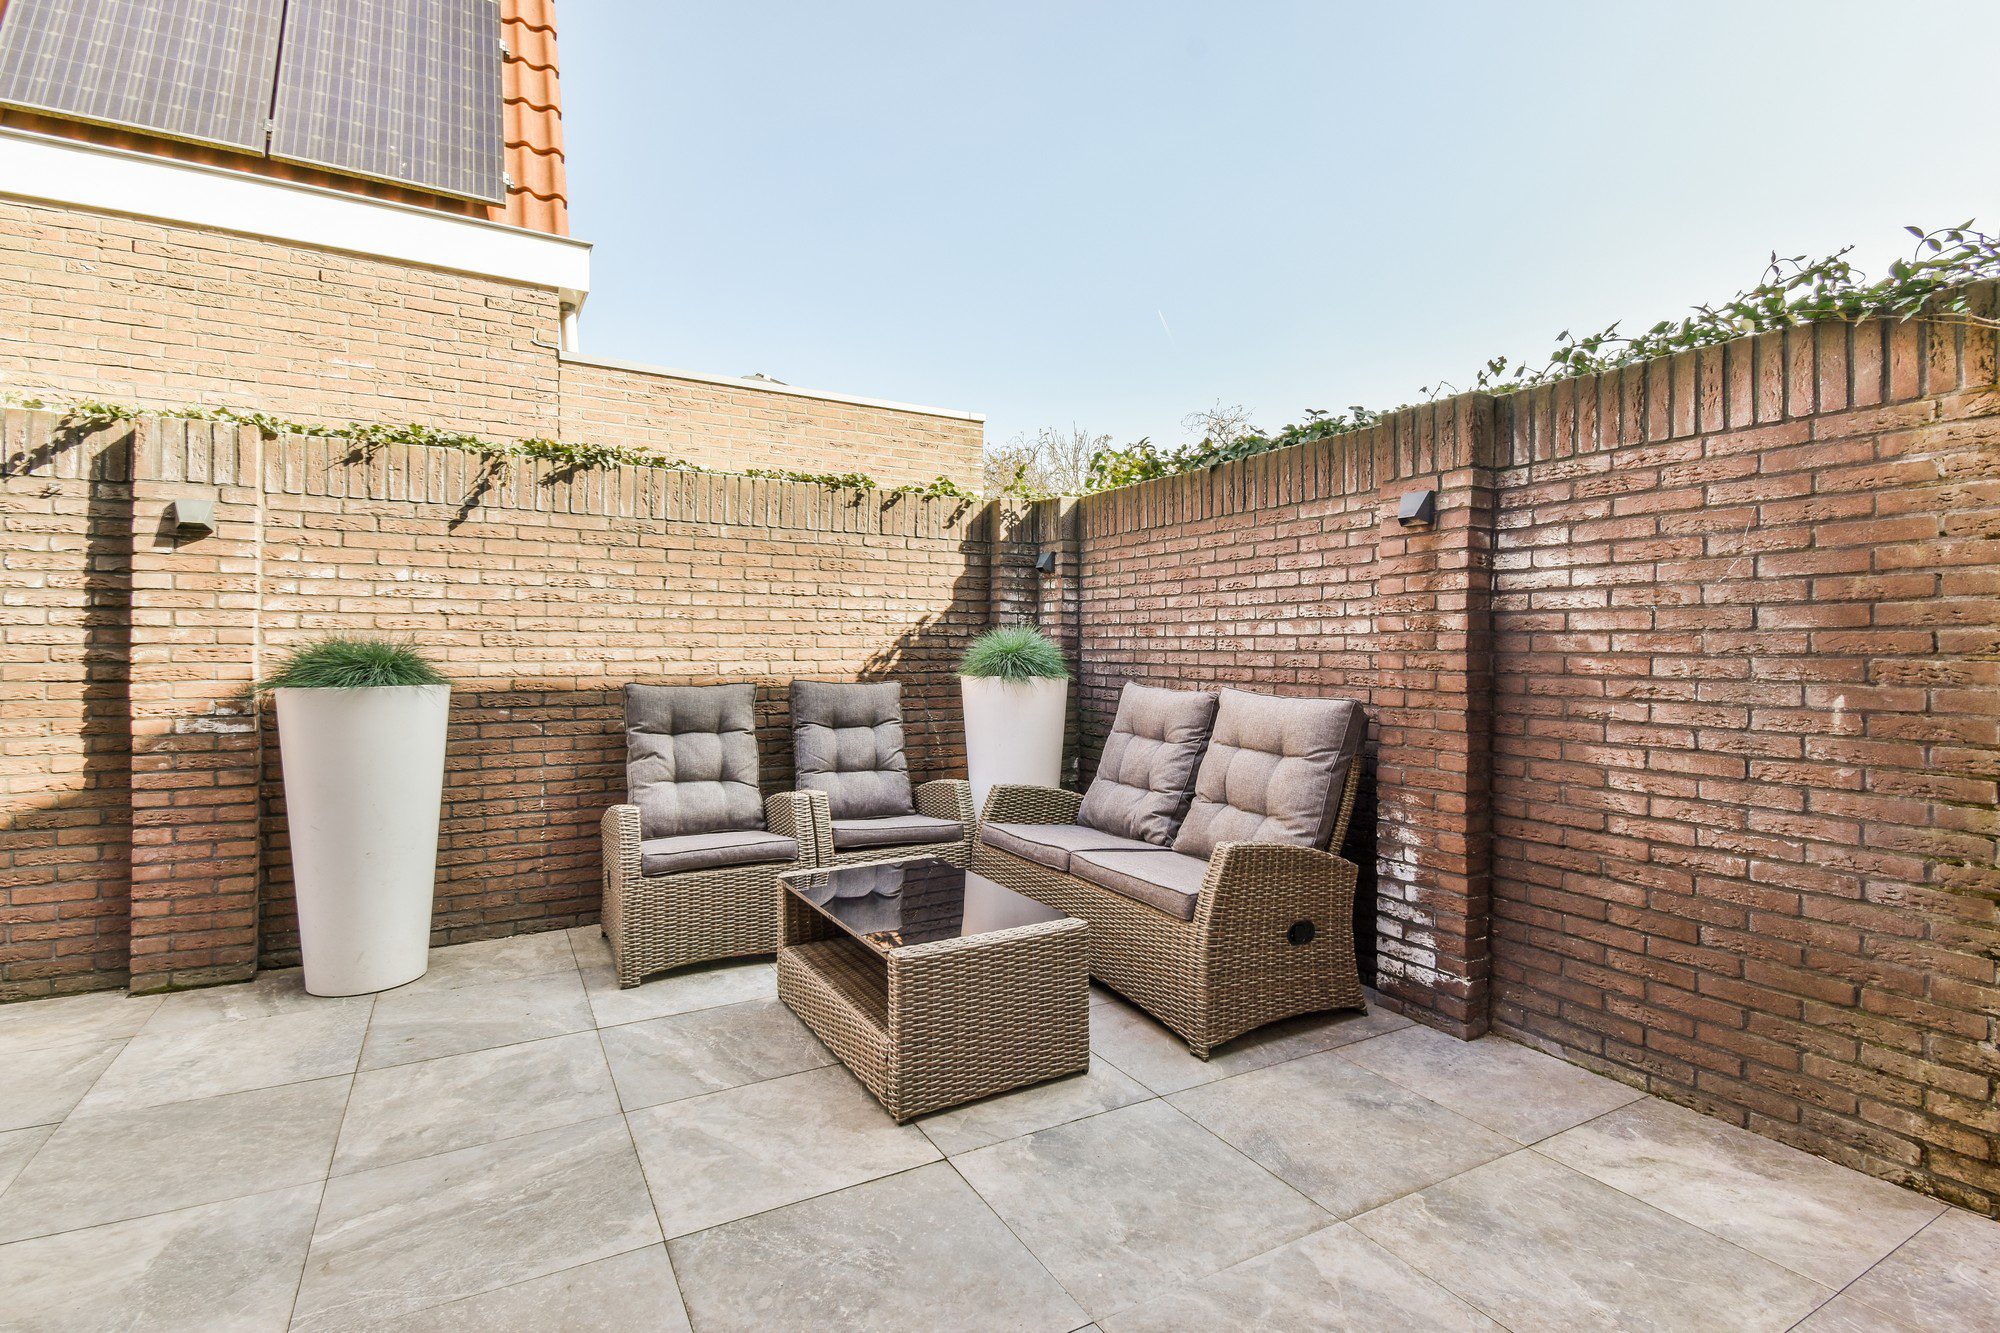 This image shows an outdoor patio area surrounded by brick walls. There is a set of patio furniture consisting of two single chairs, a loveseat, and a small coffee table, all made with a wicker-like material and fitted with cushions. On the left, there is a tall, white planter with a green plant. Above the seating area, there is some greenery trailing down the wall, and on the right-hand side, there's an exterior light fixture on the wall. On the upper left of the picture, a portion of the roof with solar panels can be observed. The patio floor is tiled with large, light-coloured stone tiles. The setting appears to be residential, and it looks like a nice space for relaxation or entertaining guests outside.